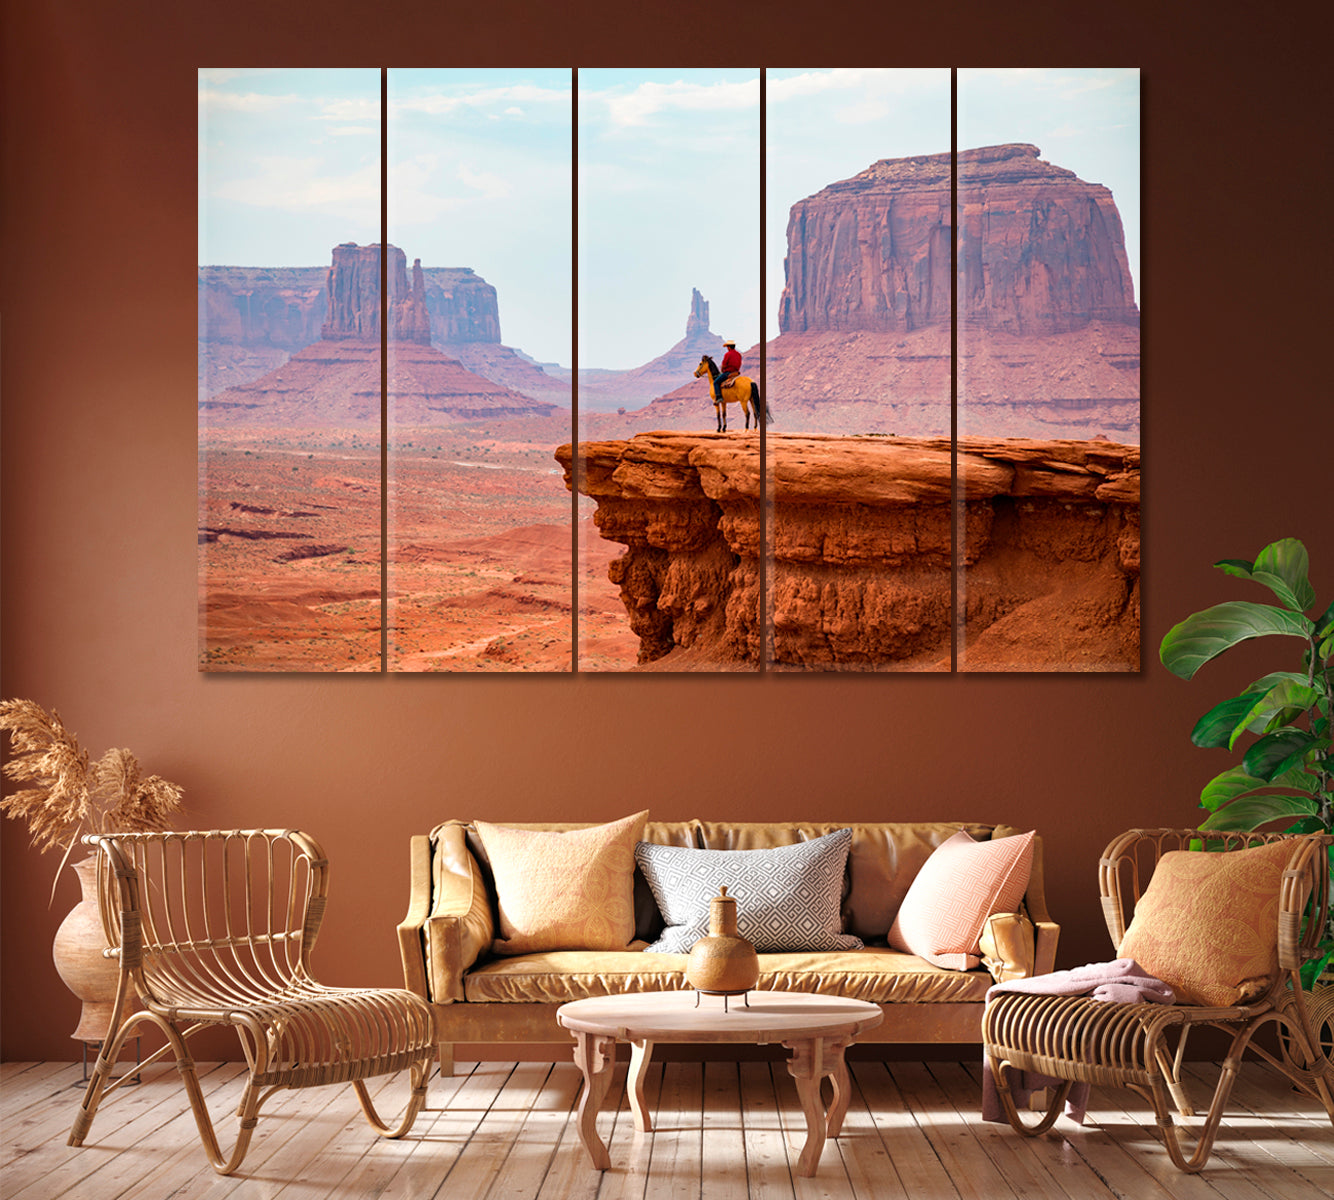 Cowboy on Horse in Monument Valley Tribal Park Arizona Canvas Print ArtLexy 5 Panels 36"x24" inches 